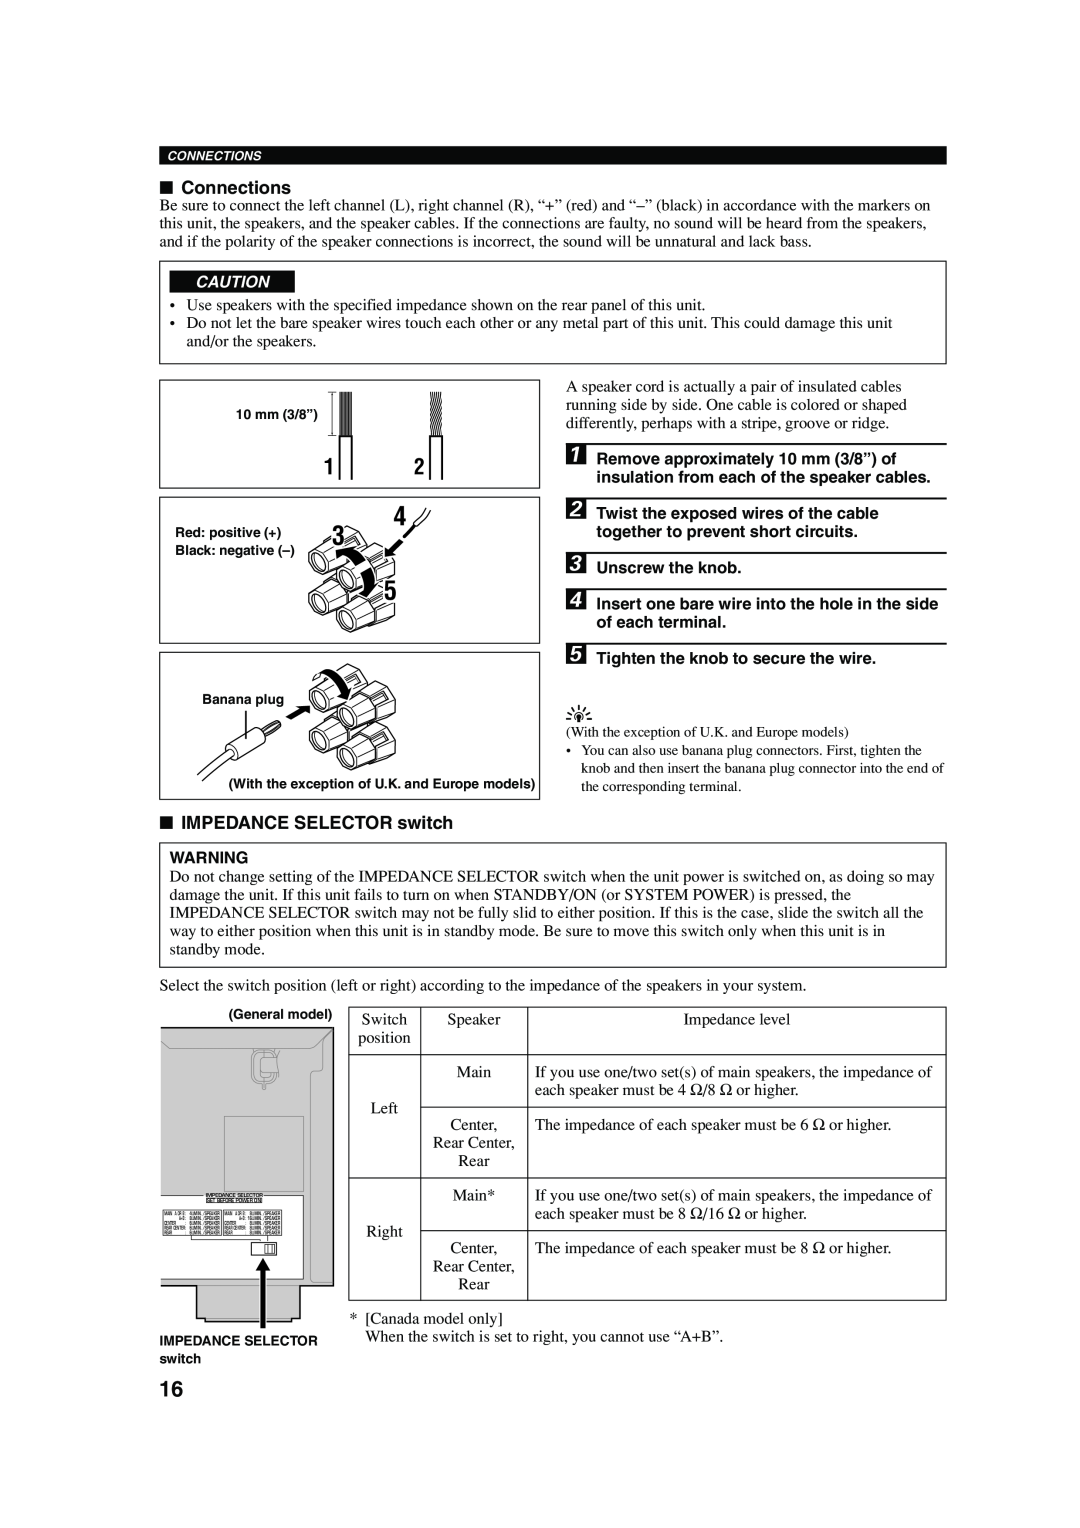 Yamaha RX-V740 owner manual Connections, IMPEDANCE SELECTOR switch 